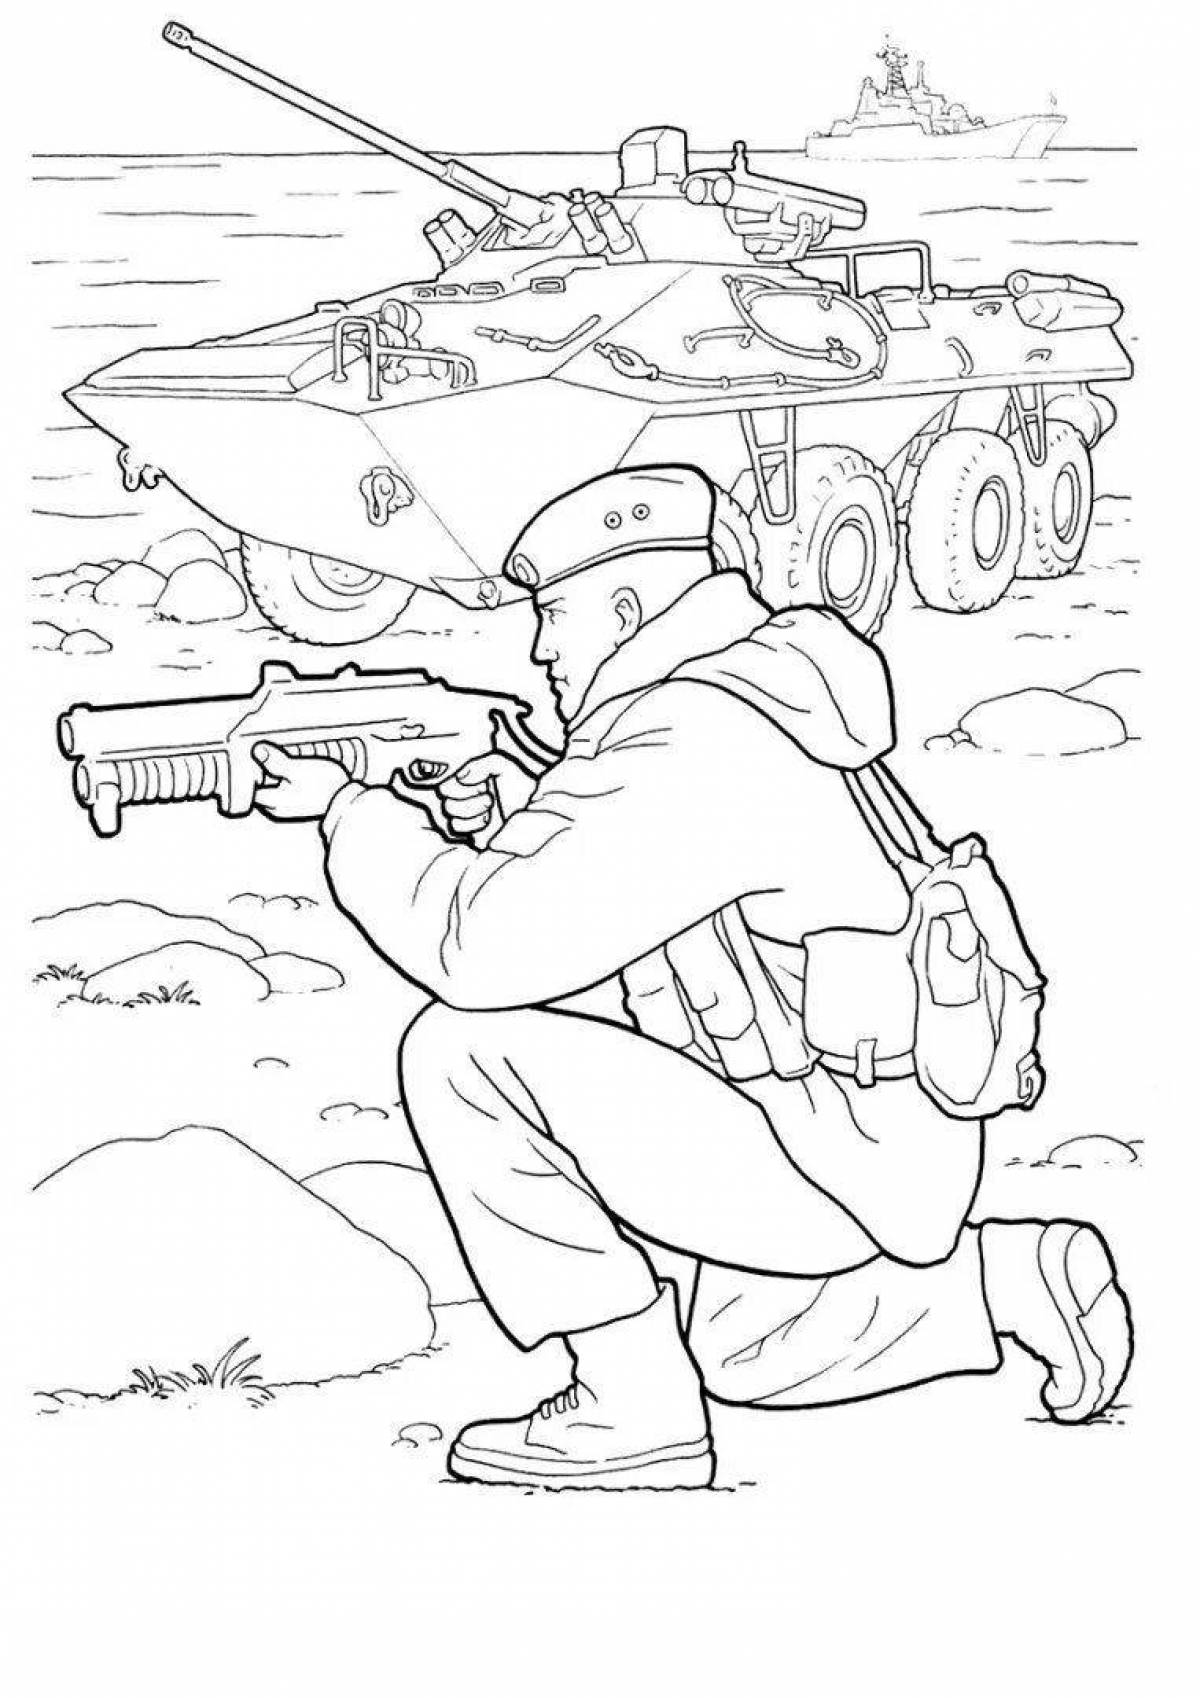 Creative modern soldier coloring book for kids